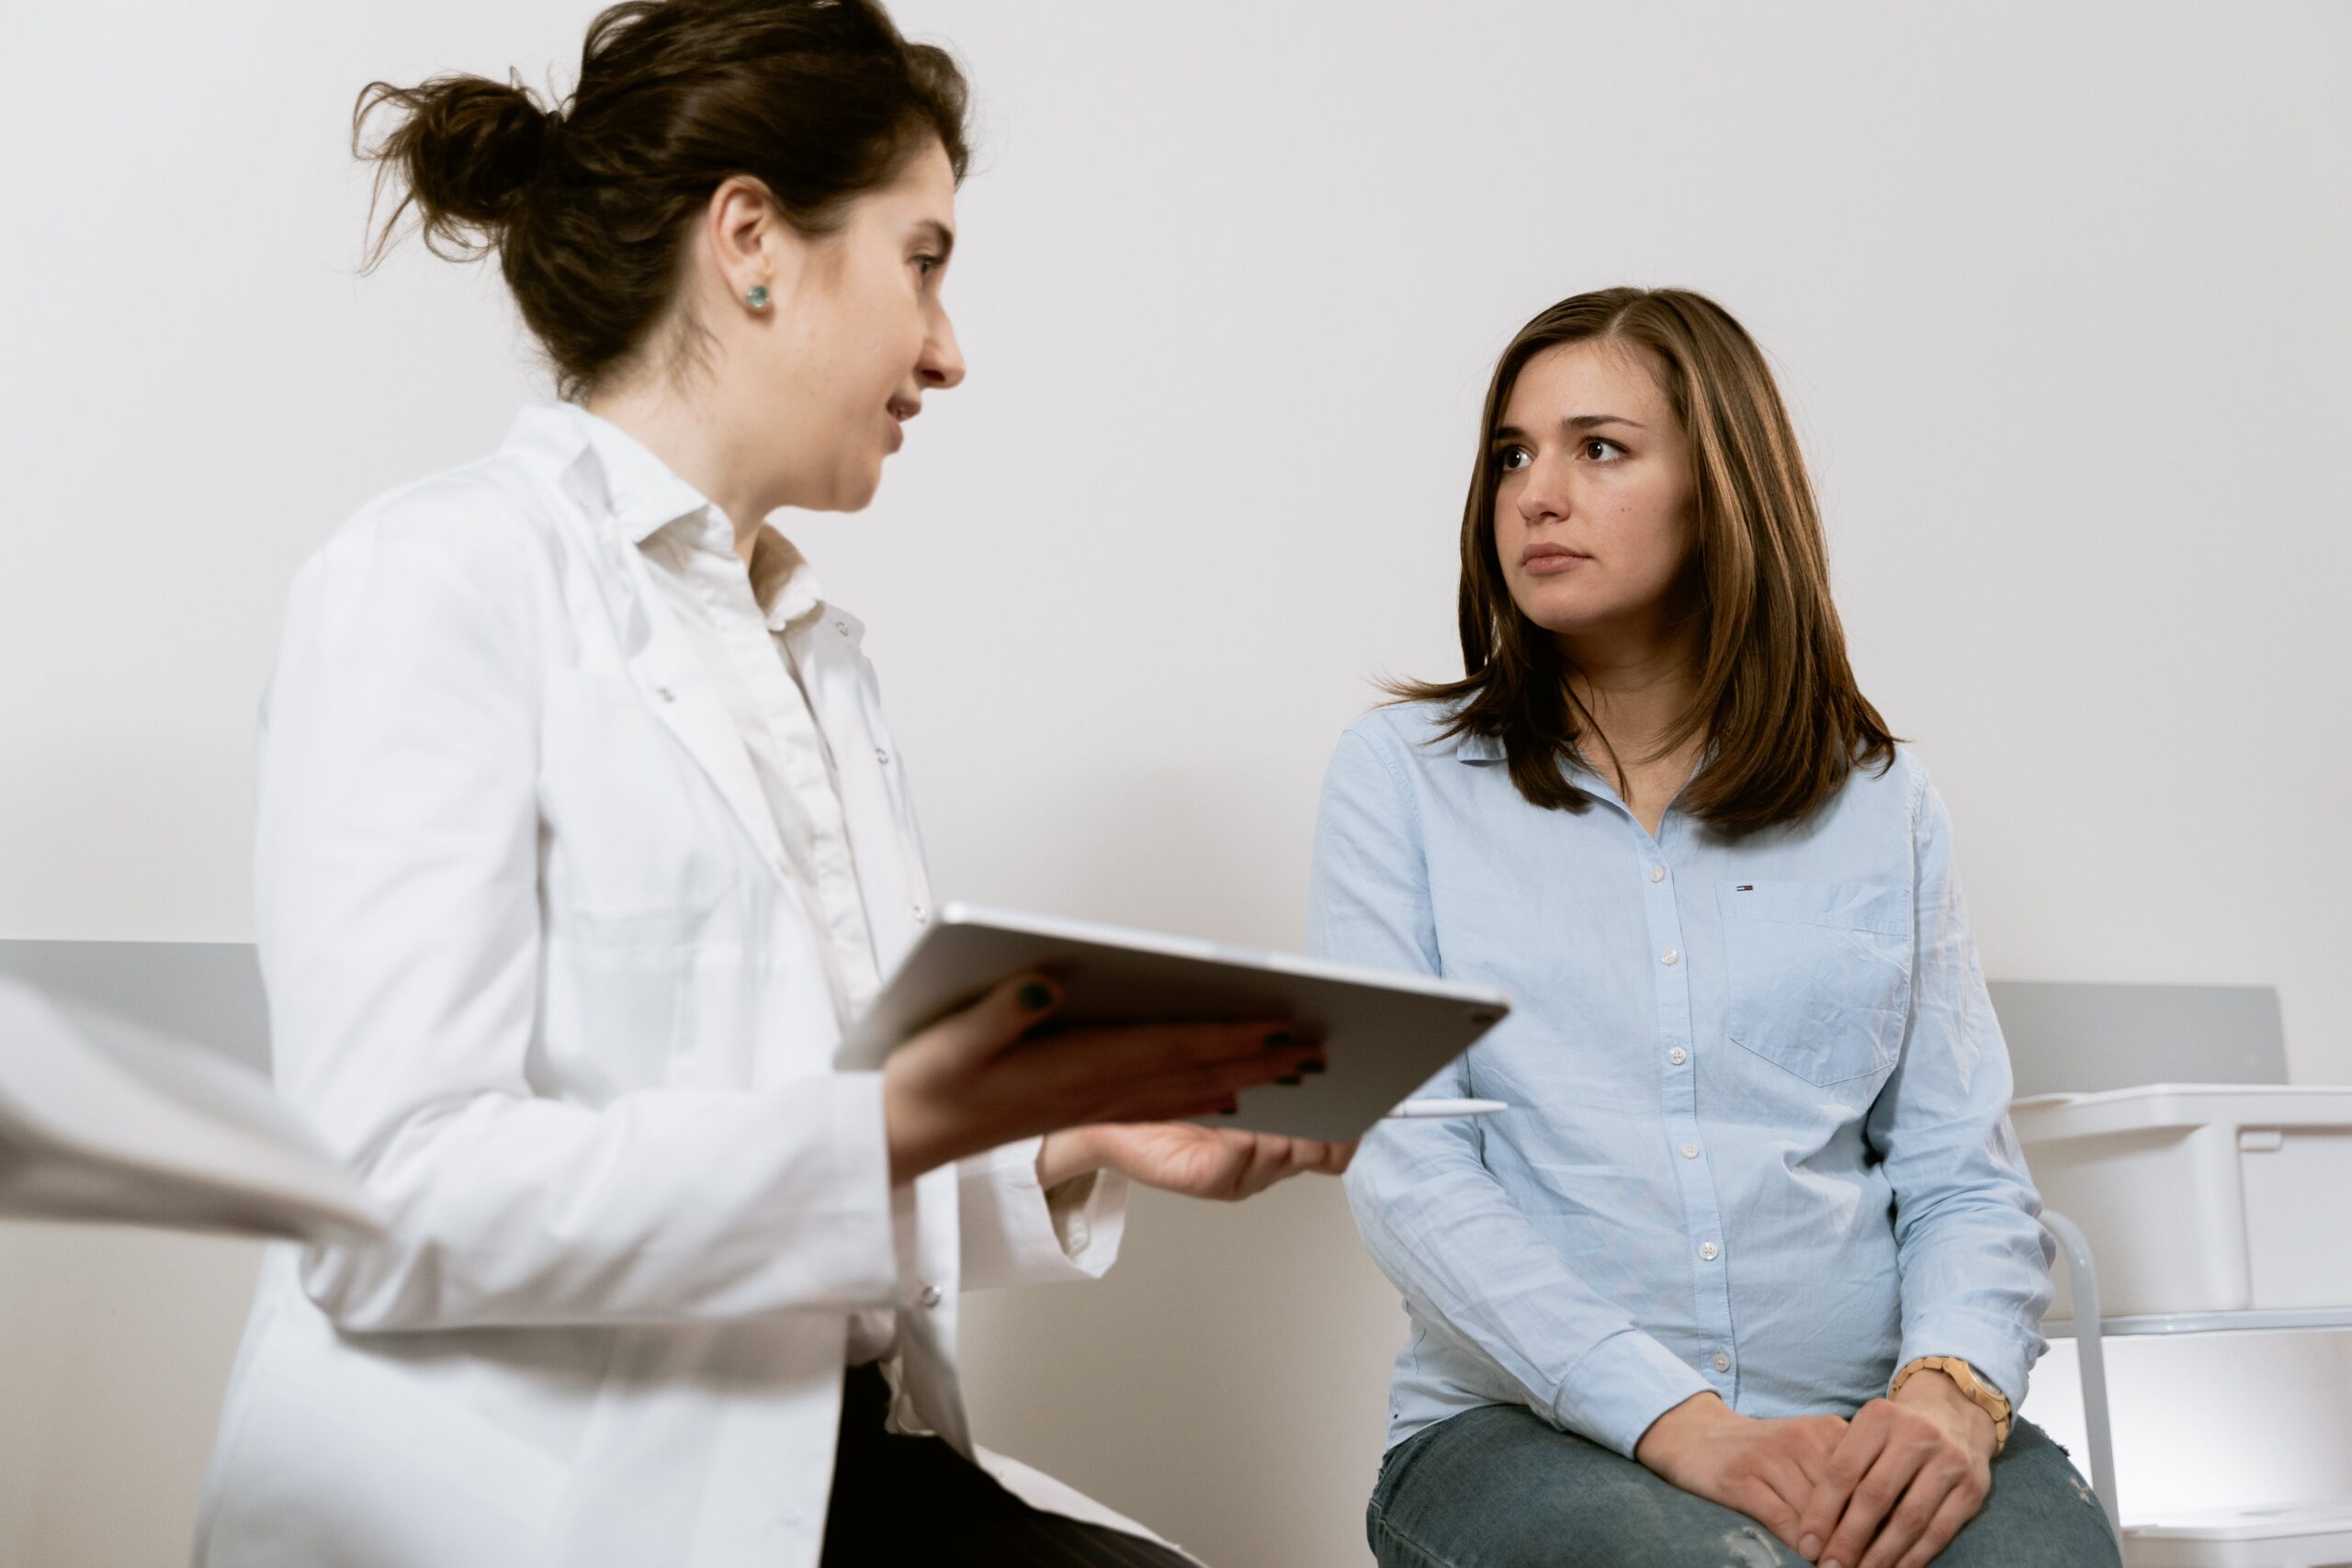 How To Find A Good Gynecologist For You